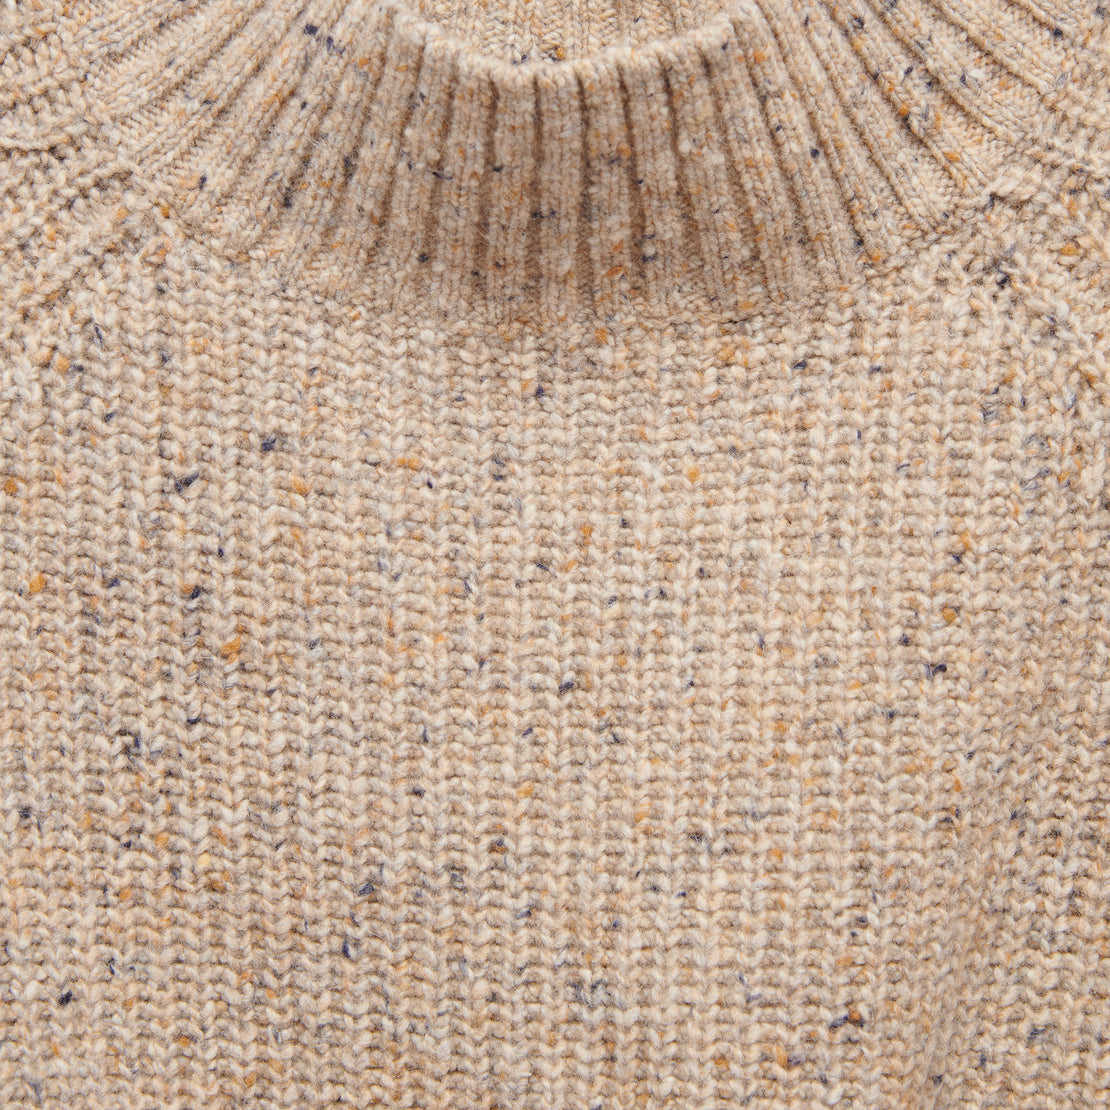 Teddy Donegal Sweater - Oatcake - Mollusk - STAG Provisions - W - Tops - Sweater